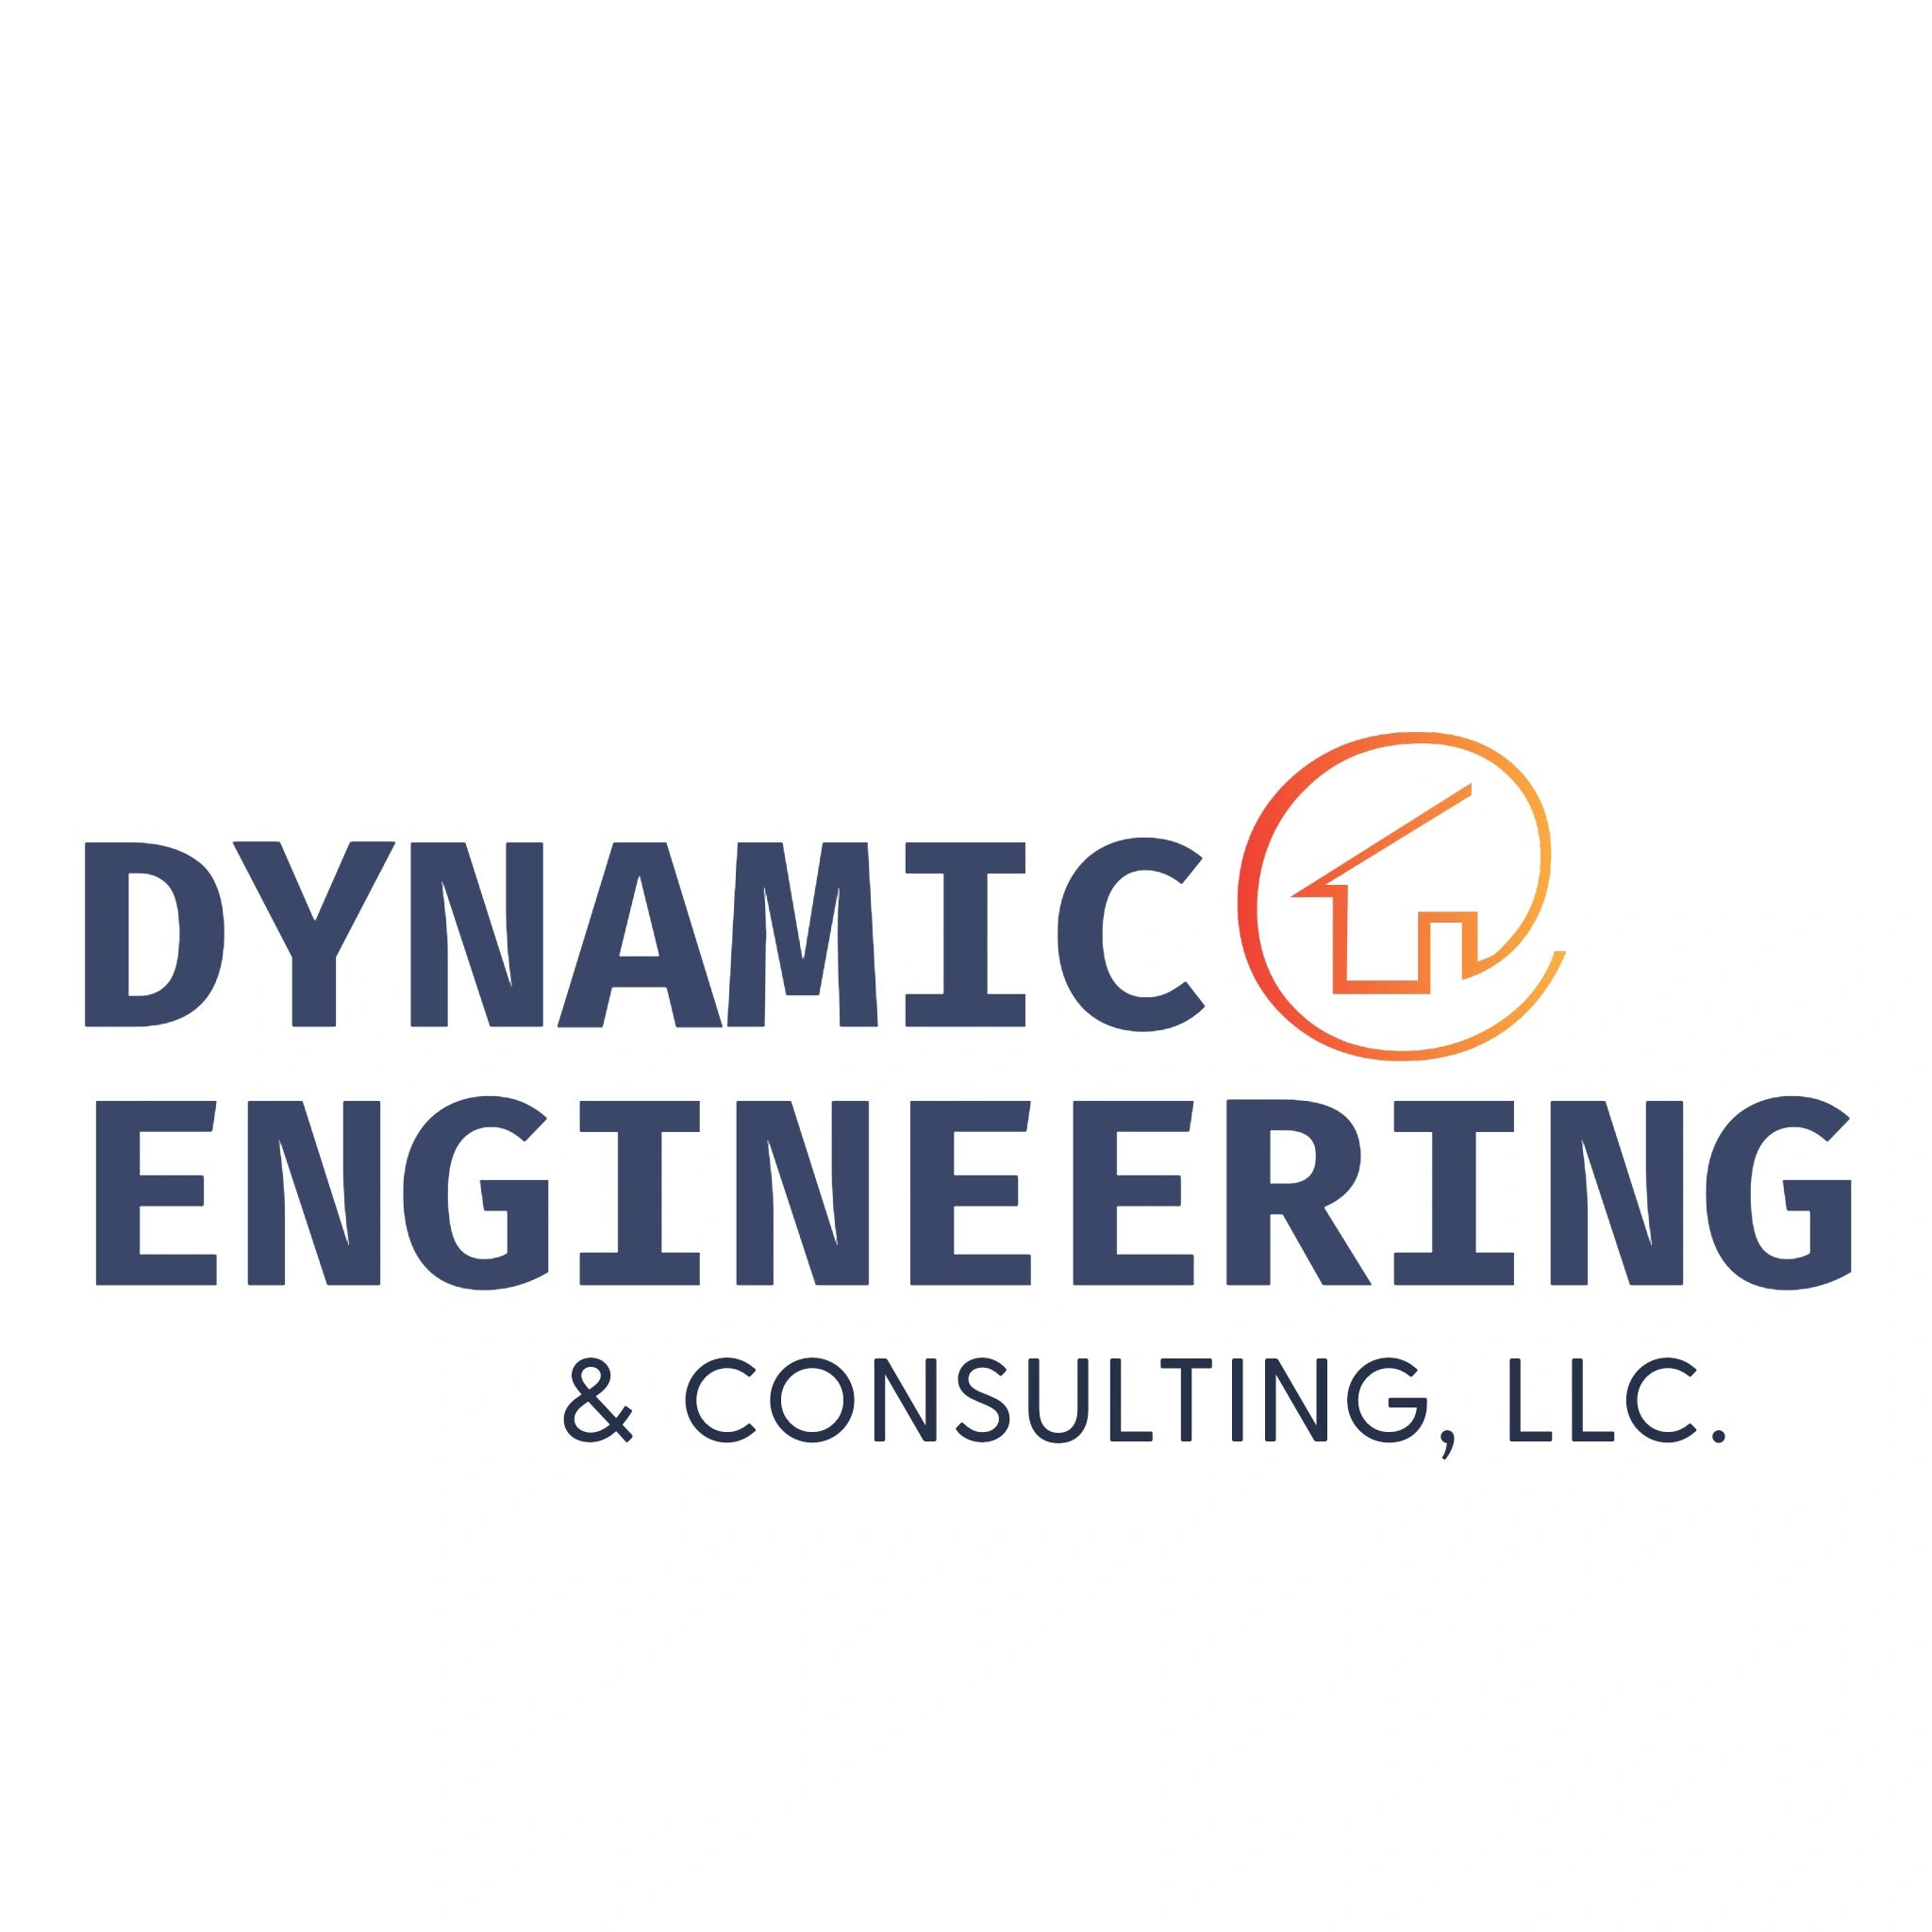 Professional Engineer | Dynamic Engineering & Consulting, LLC.